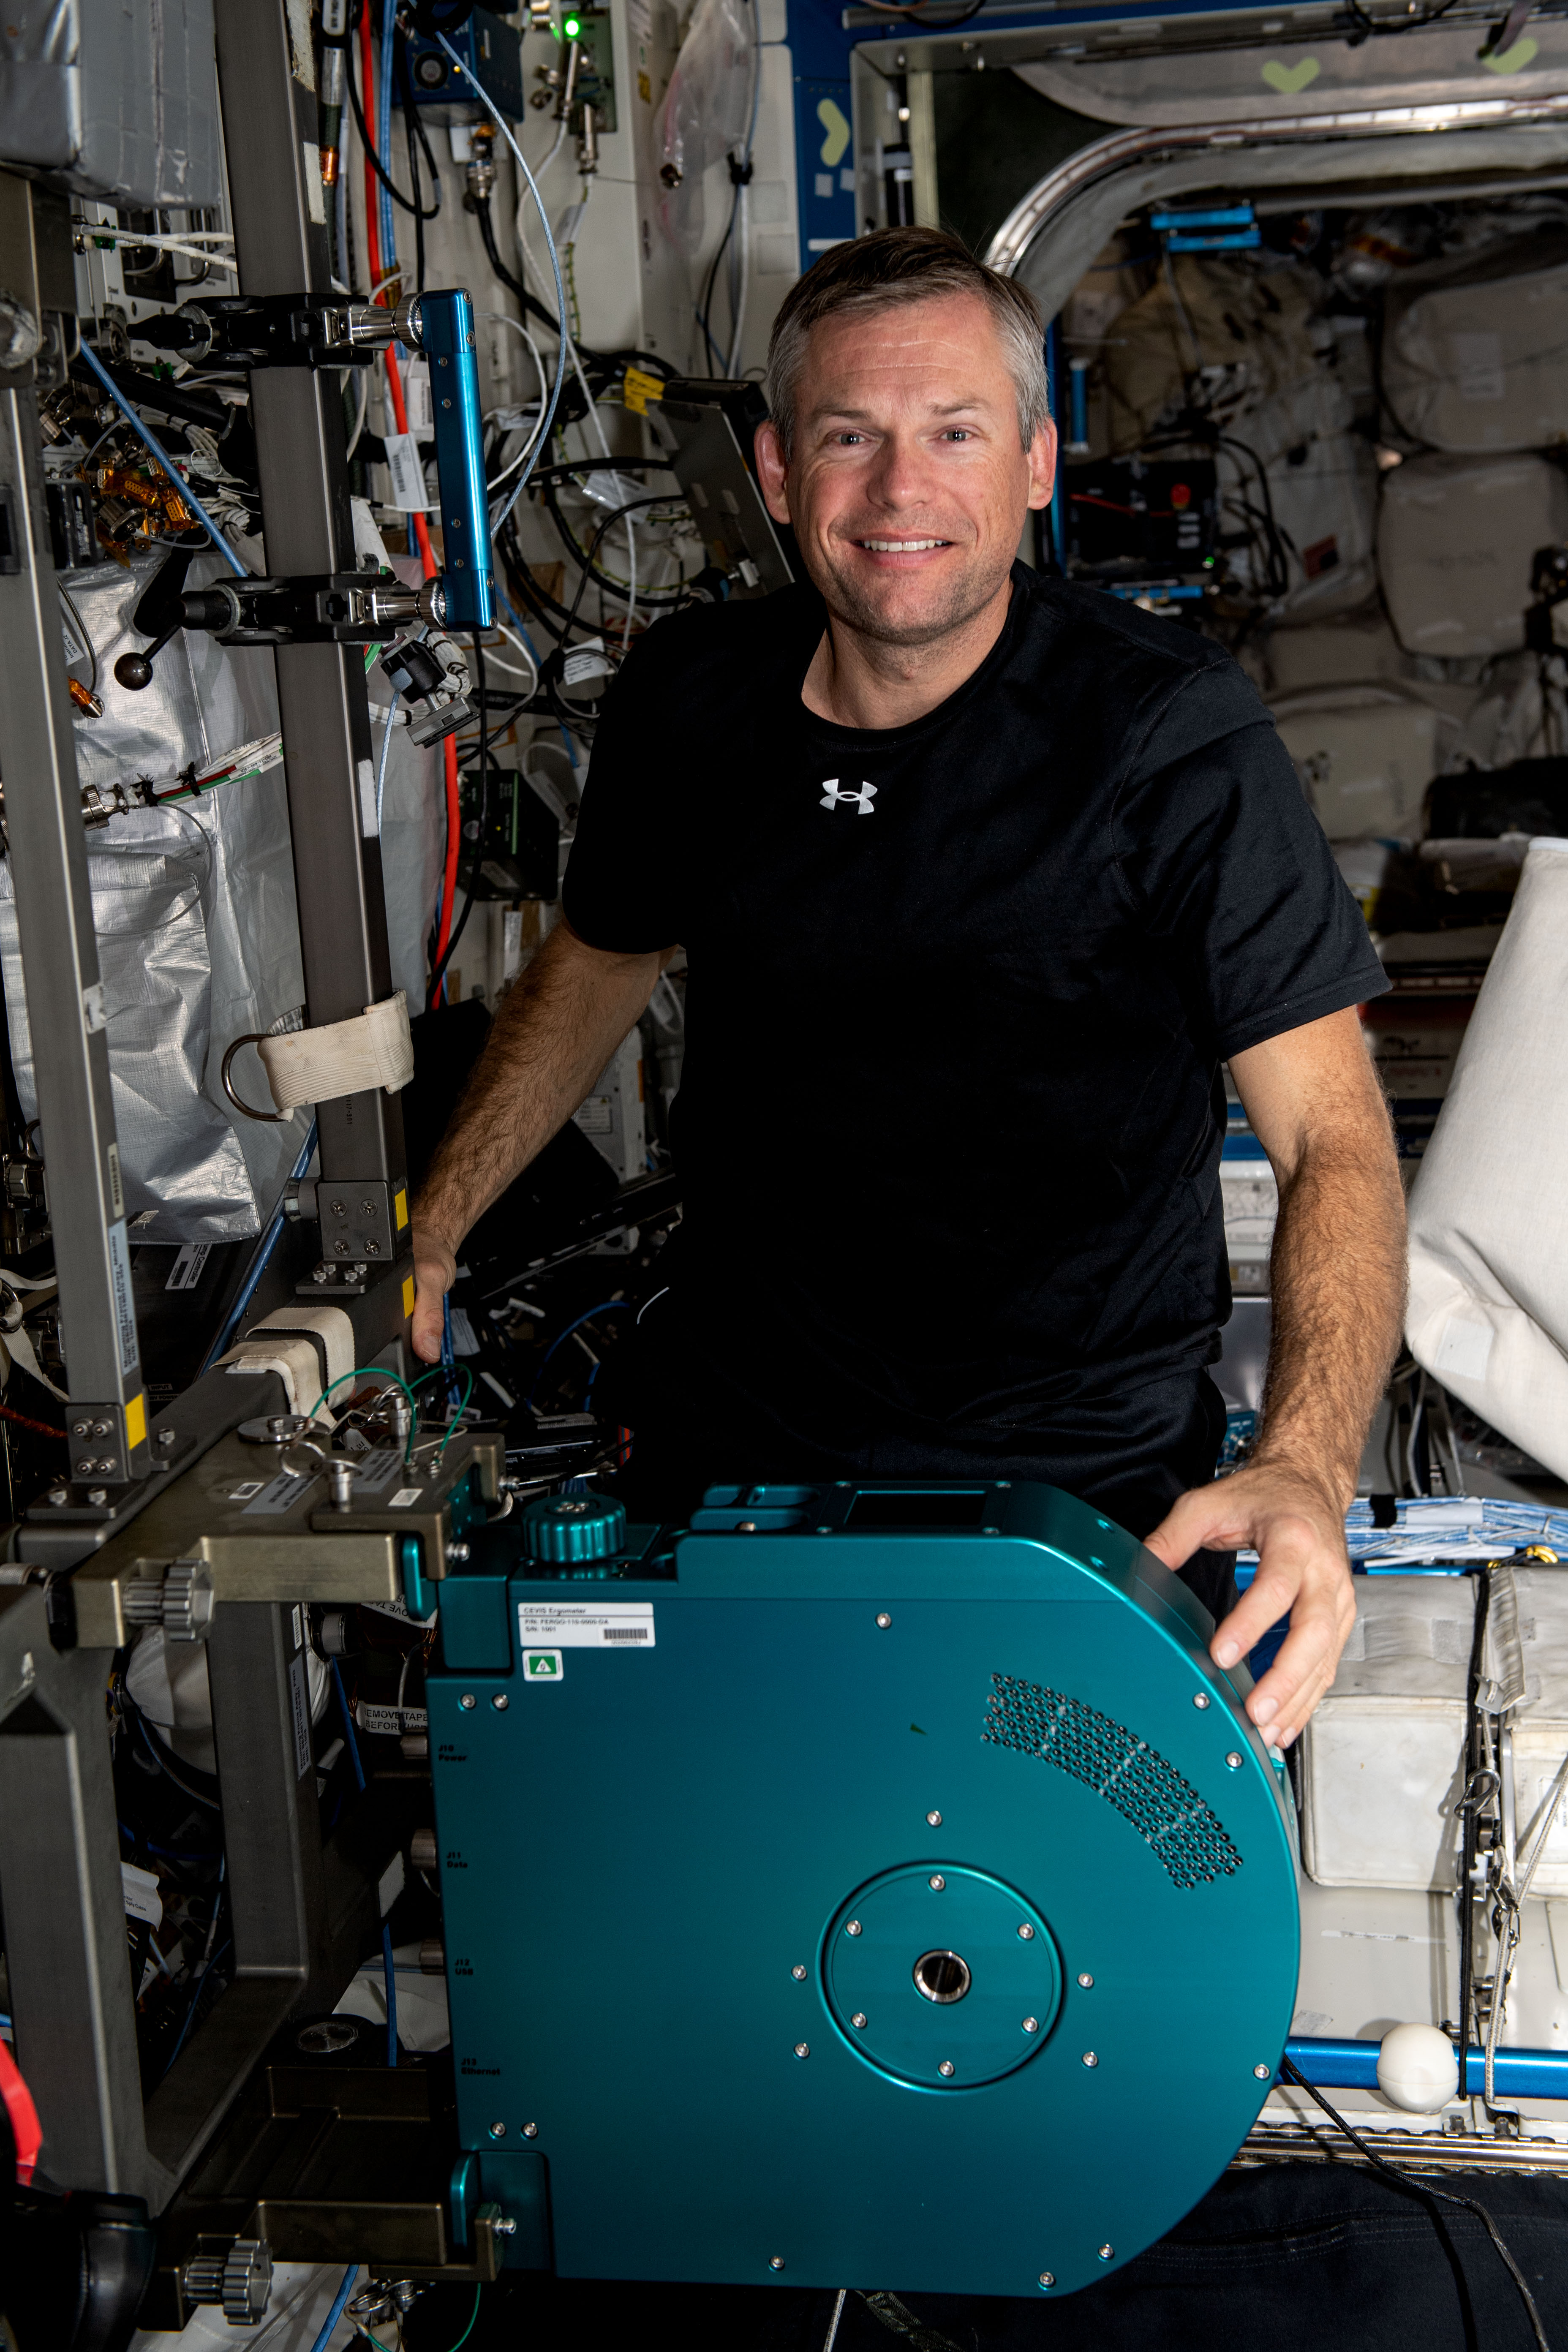 ESA (European Space Agency) astronaut and Expedition 70 Commander Andreas Mogensen is pictured with the International Space Station's new exercise cycle after it was installed in the Destiny laboratory module.